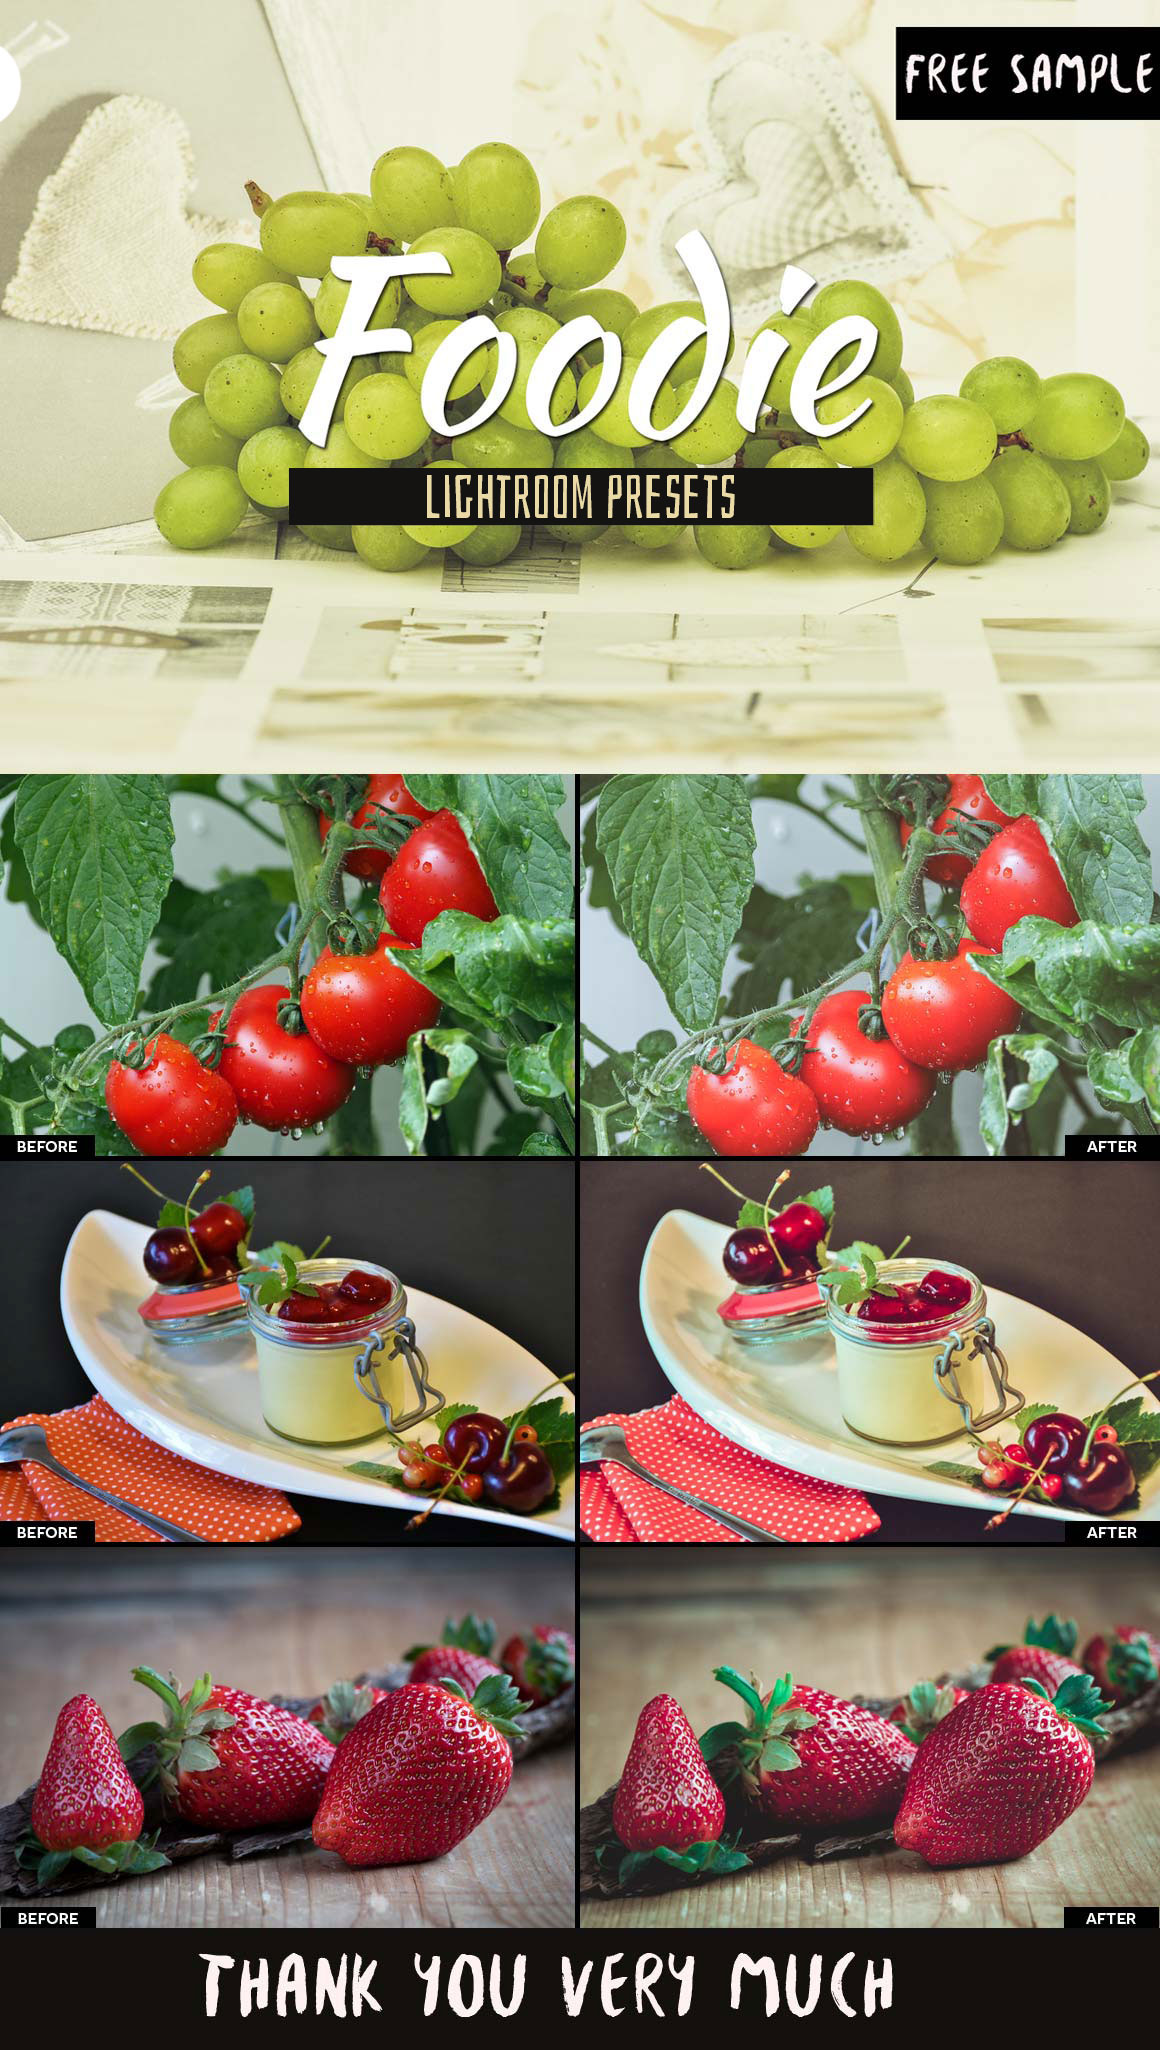 food lightroom presets collection is a set of 3 presets for Adobe Lightroom that helps food photographers to make their shots yummy and powerful and was specially designed to